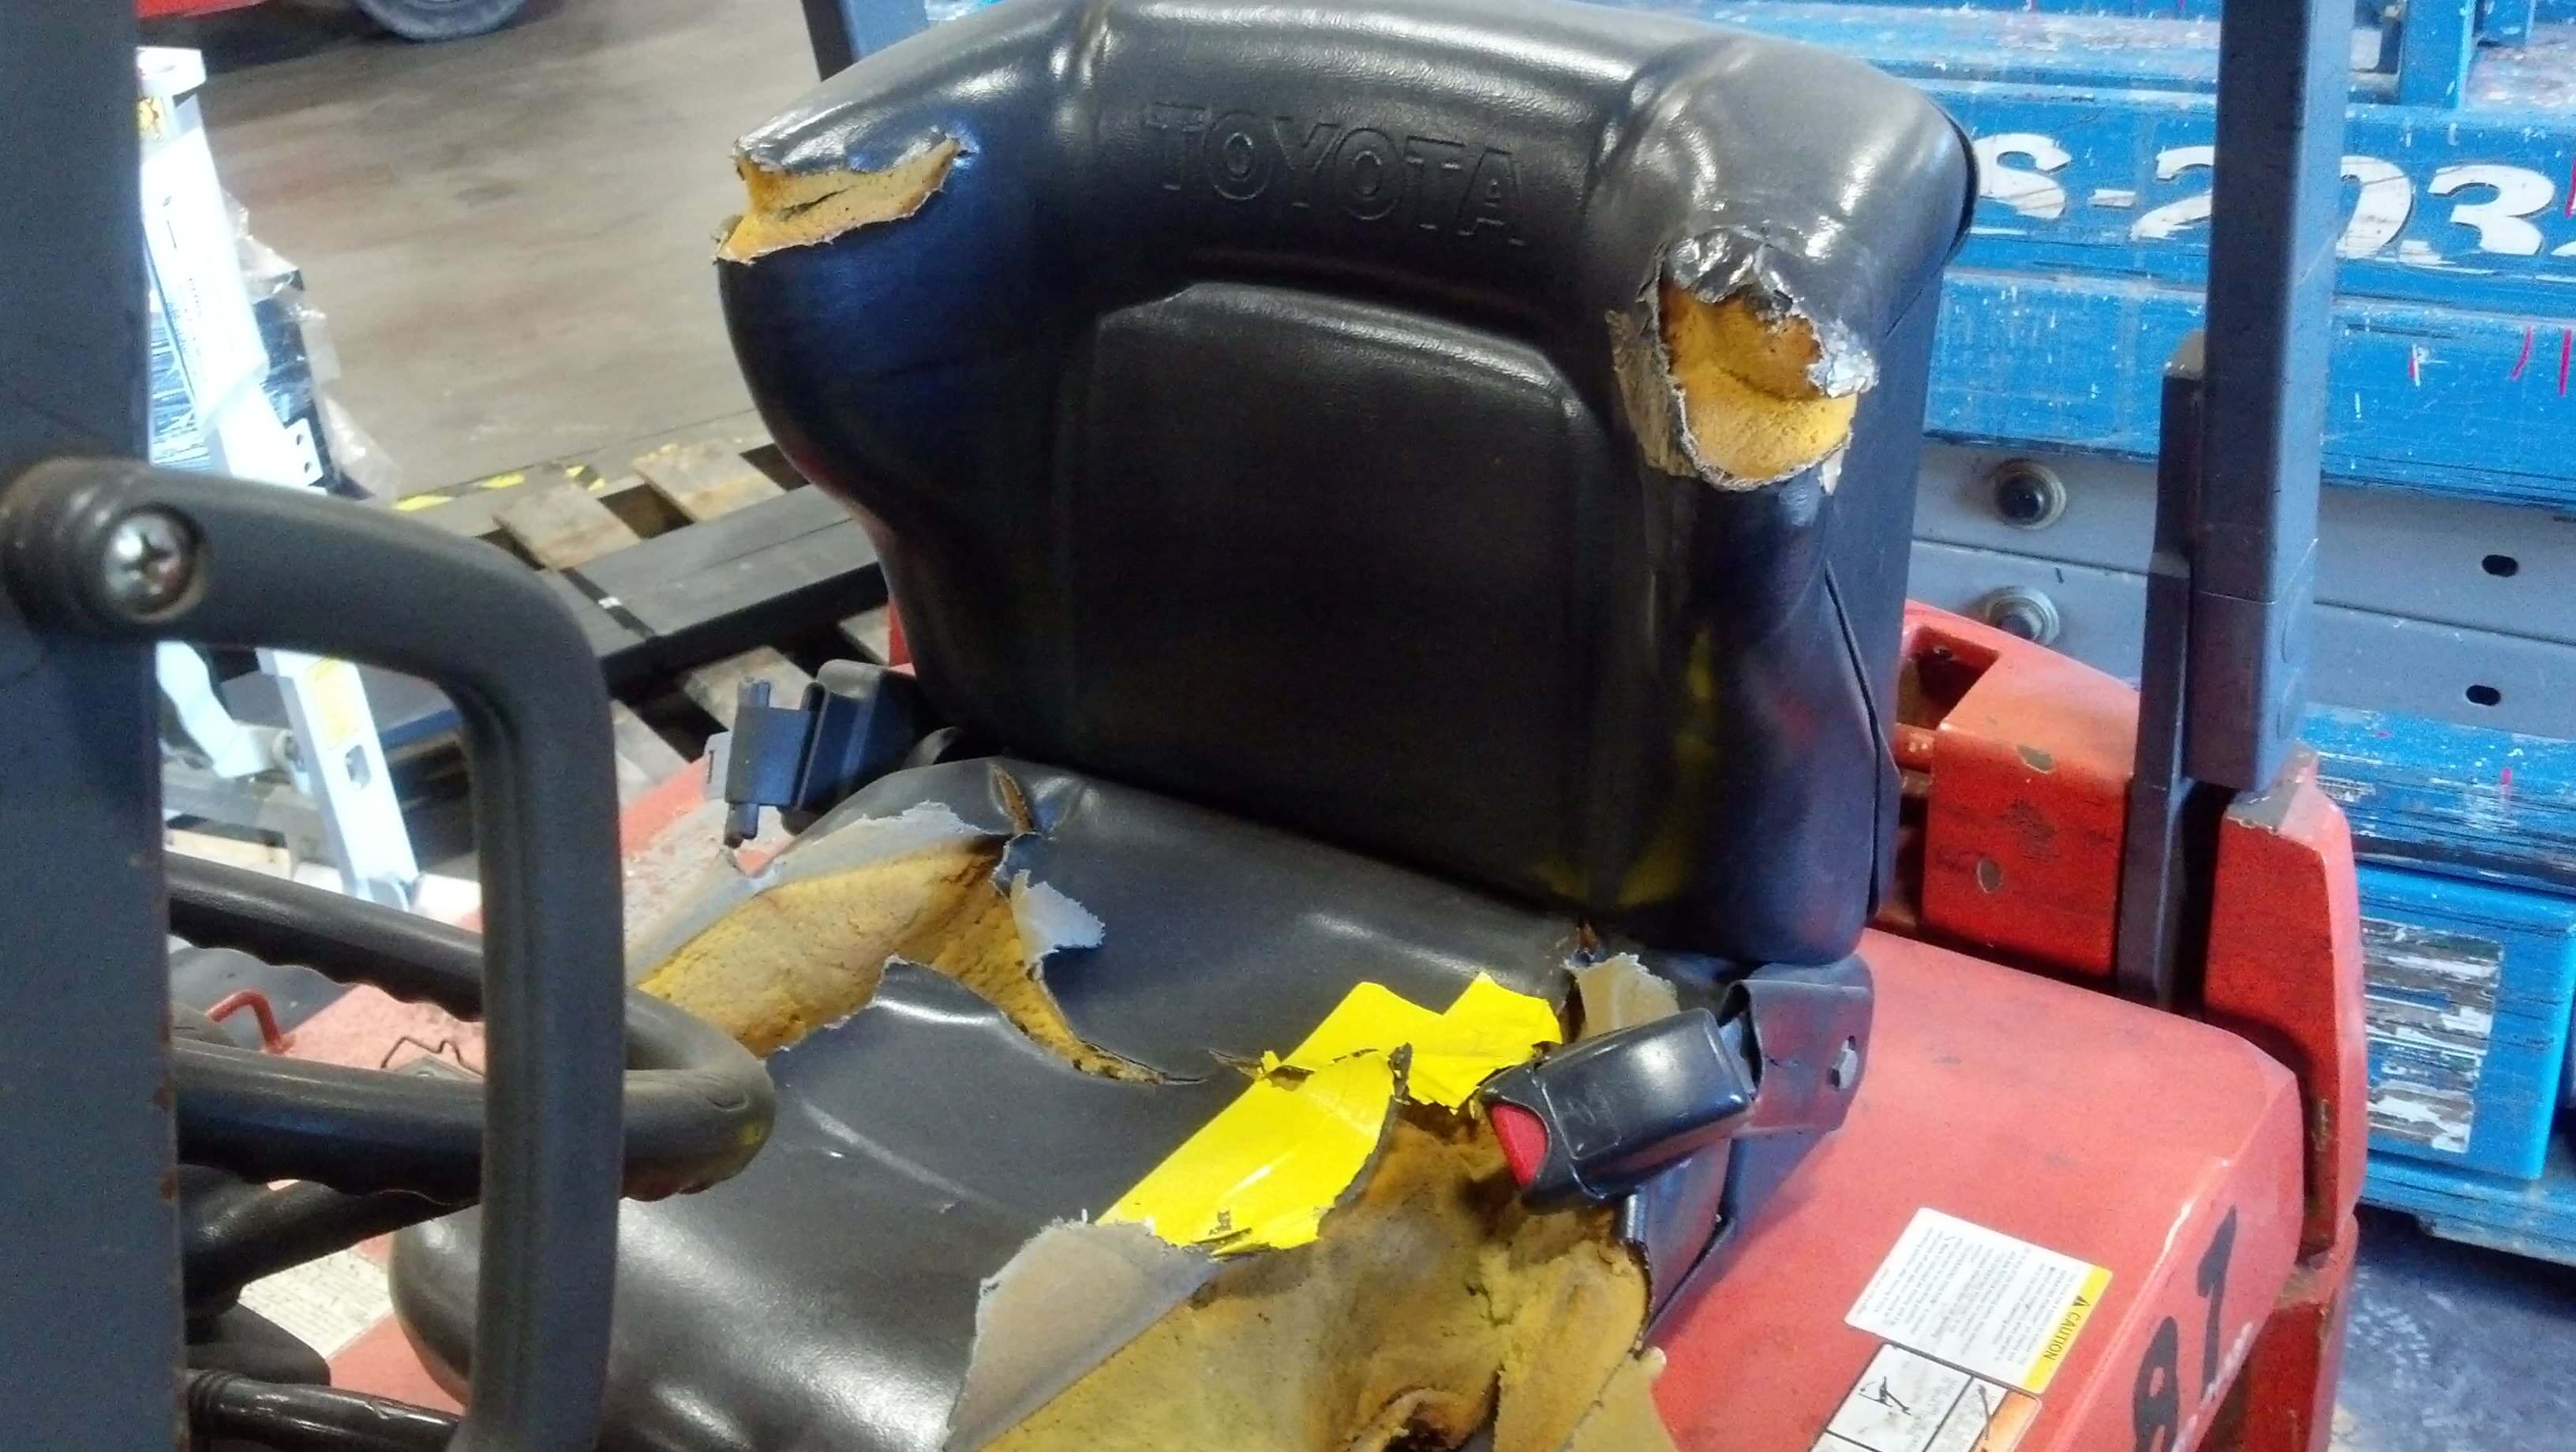 A destroyed Toyota forklift seat that needs to be replaced immediately.